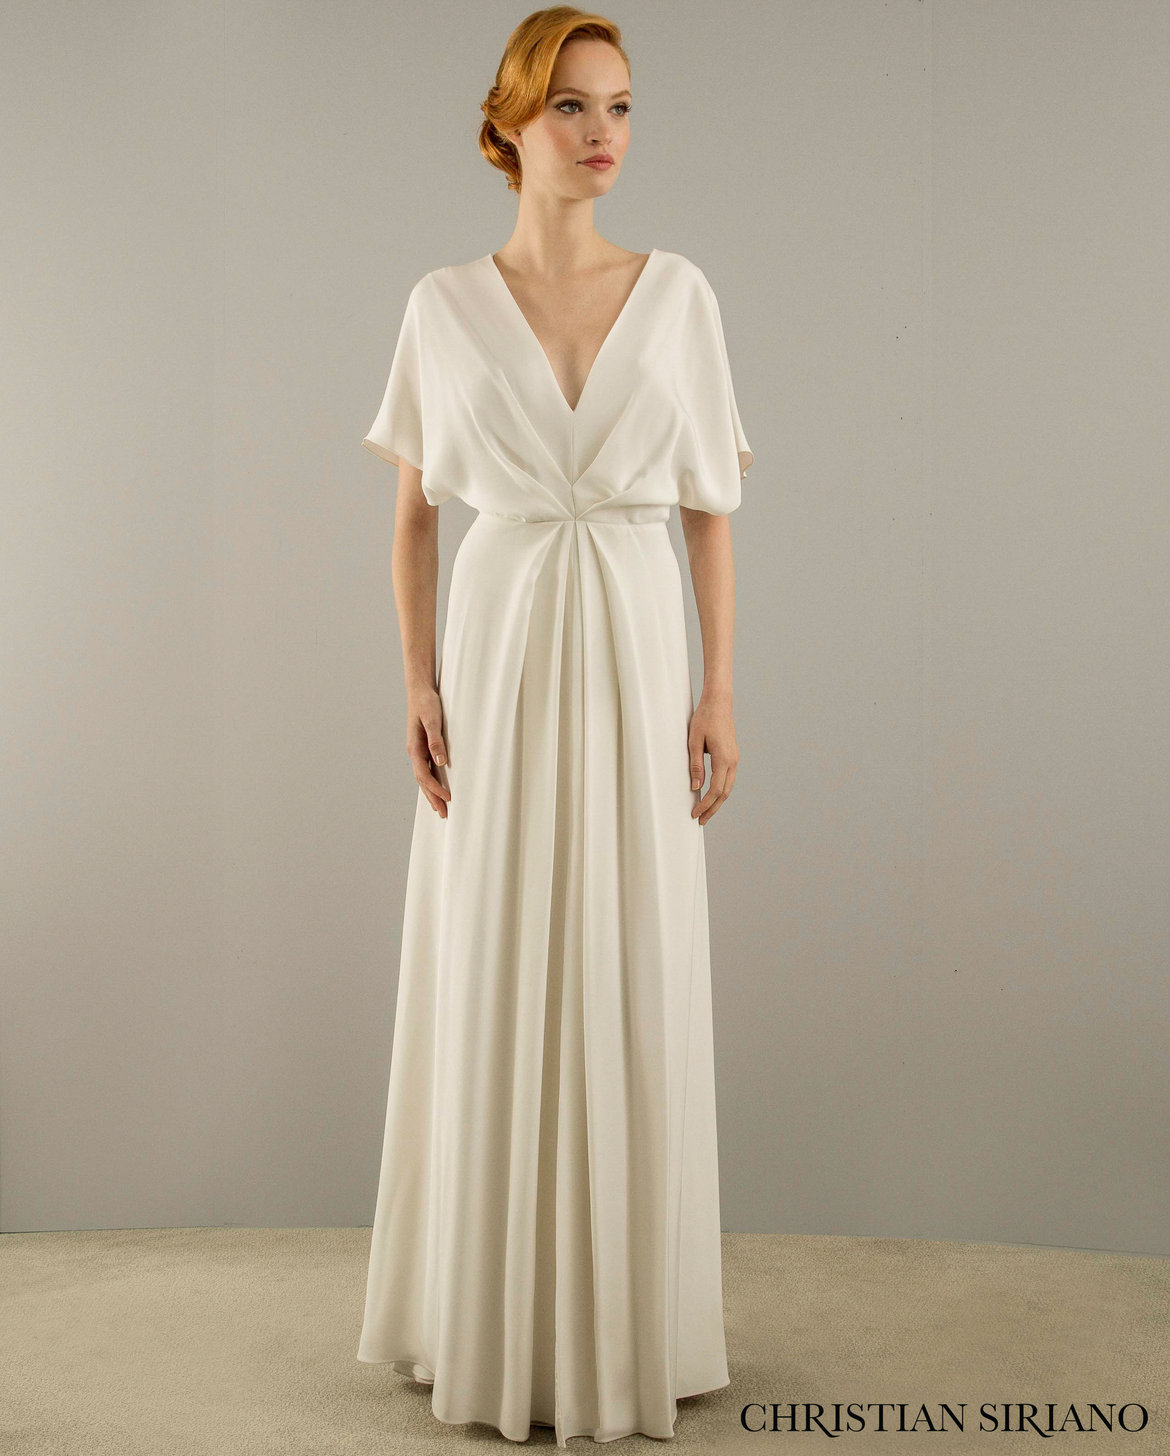 First Look: Christian Siriano's New Bridal Collection For Kleinfeld ...